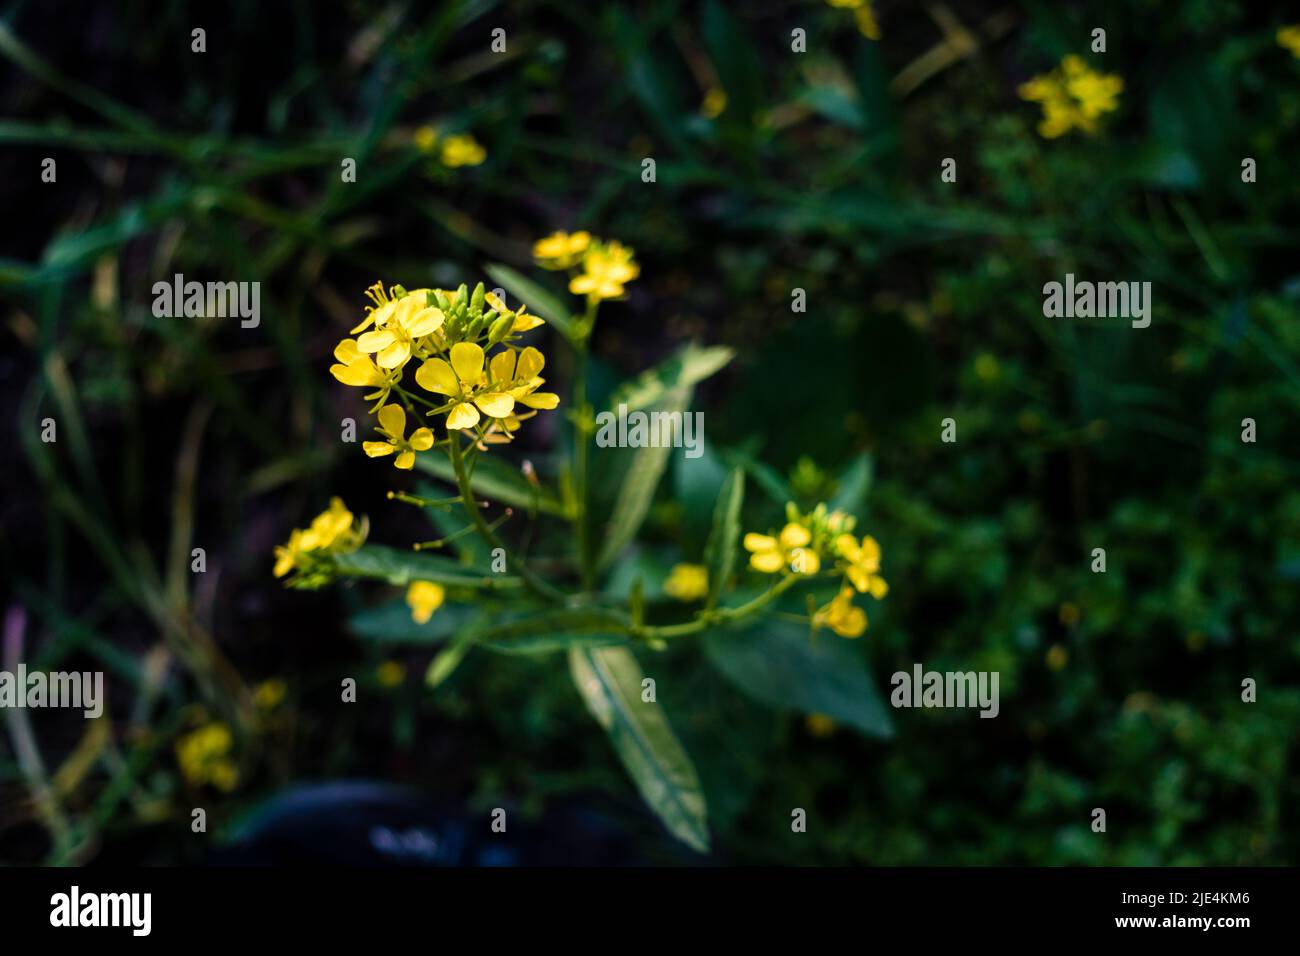 A closeup shot of Mustard Plant with blooming yellow flowers, leaves and seeds in an Indian garden. Stock Photo